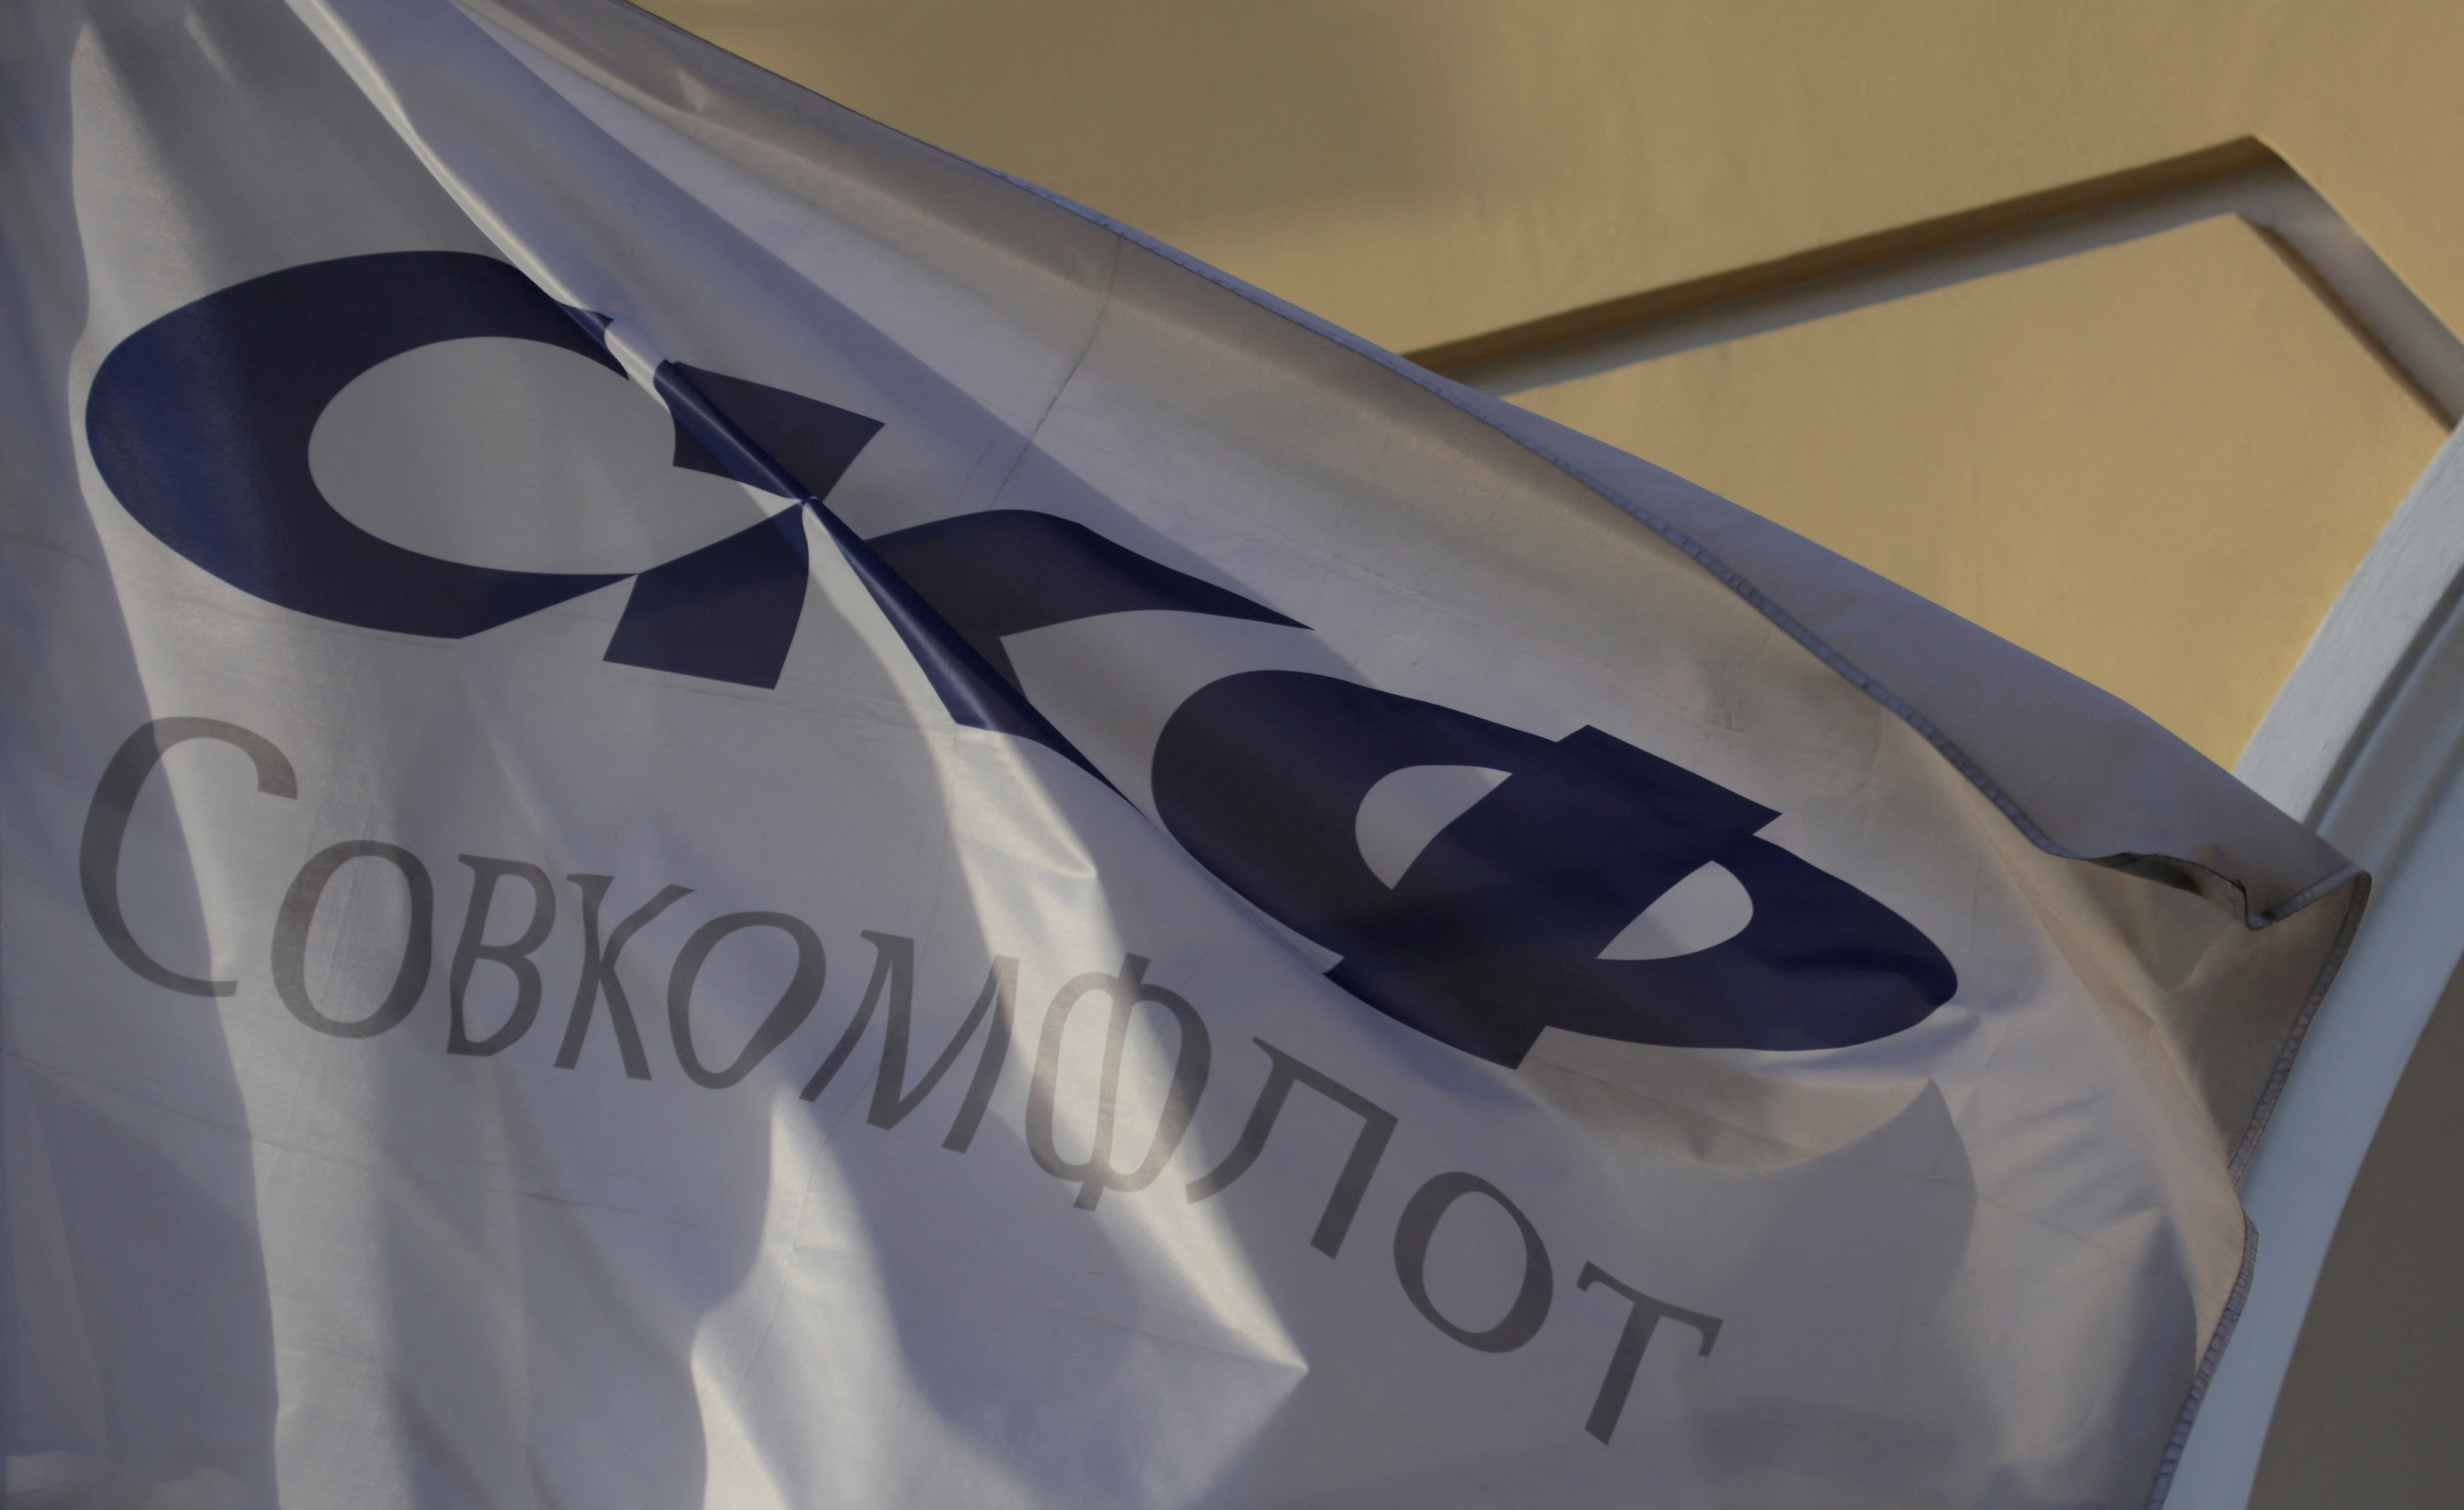 A flag depicting the logo of the Russian state-owned shipping conglomerate Sovcomflot flies outside the company's hearquarters in St. Petersburg